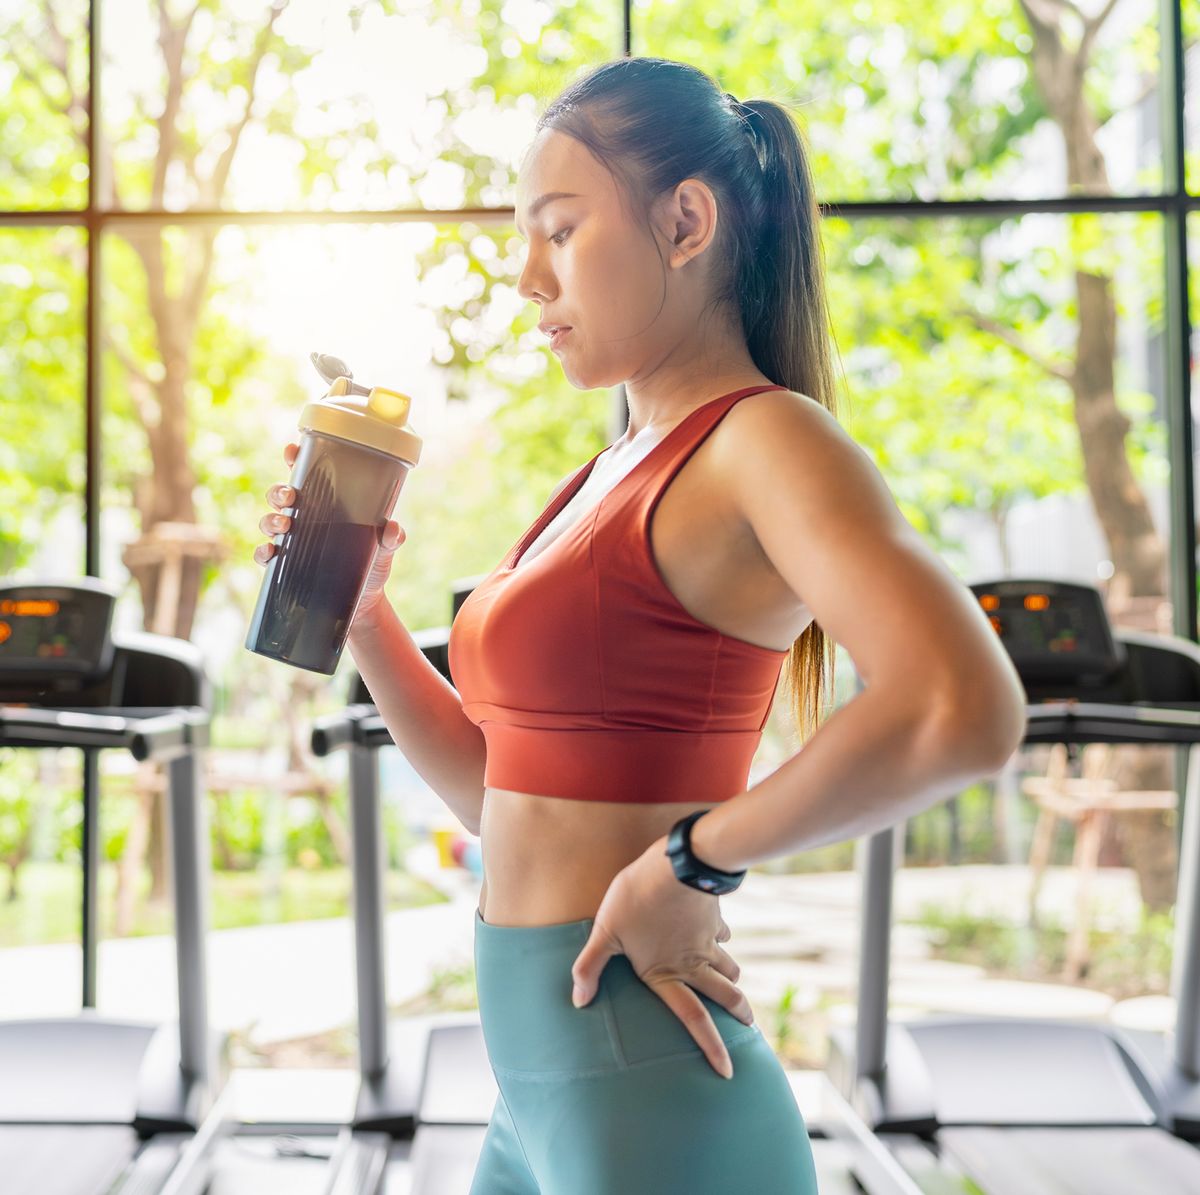 Is It Better To Drink A Protein Shake Before Or After A Workout?